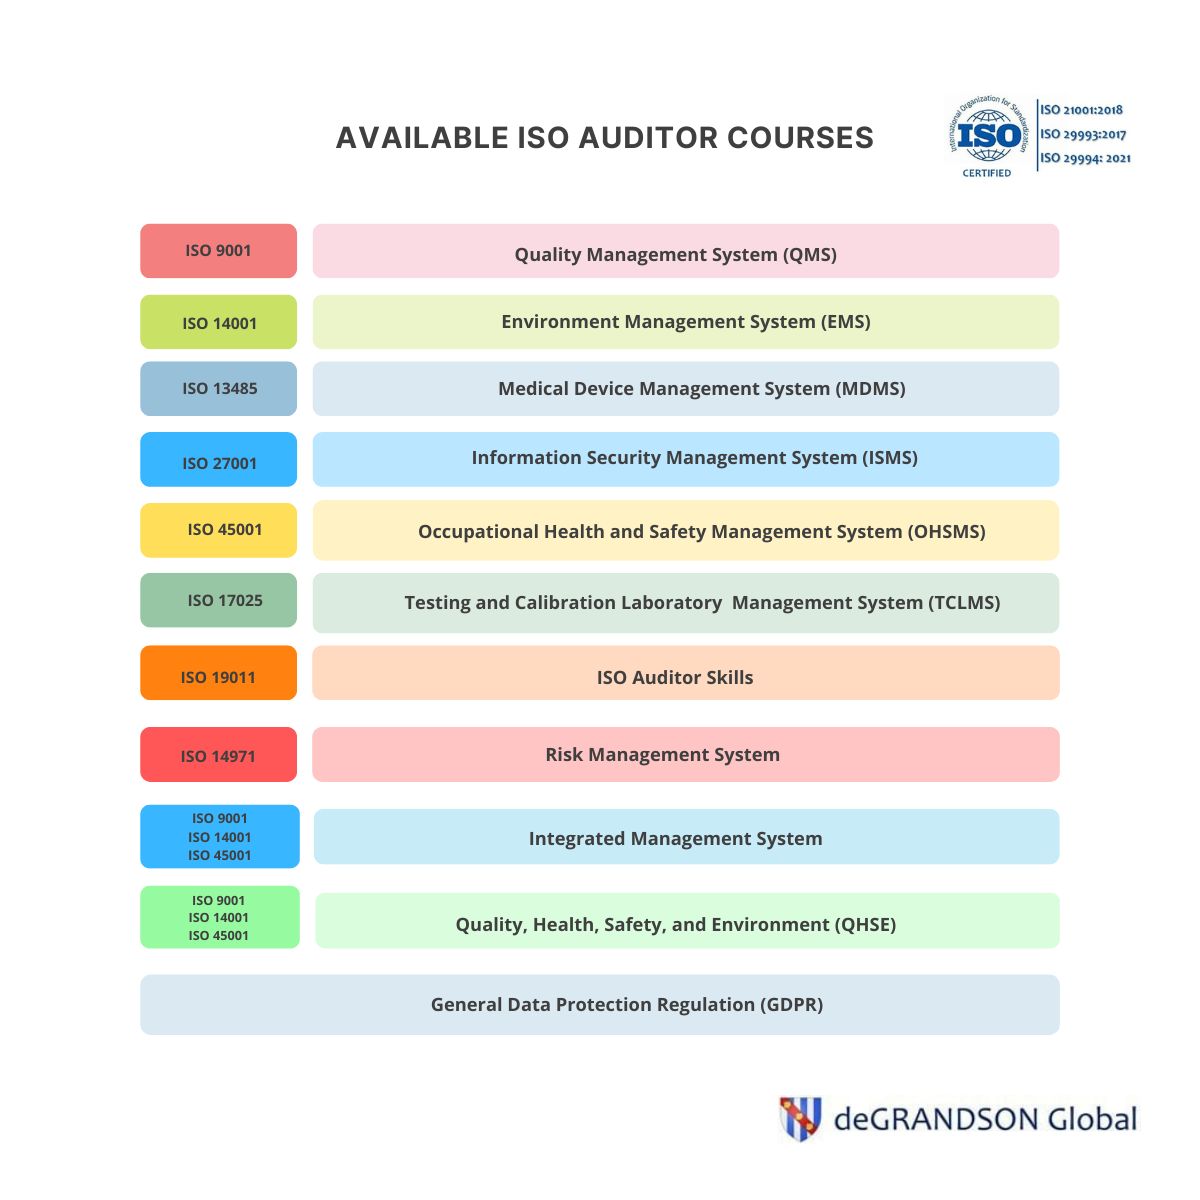 Our ISO Auditor Courses